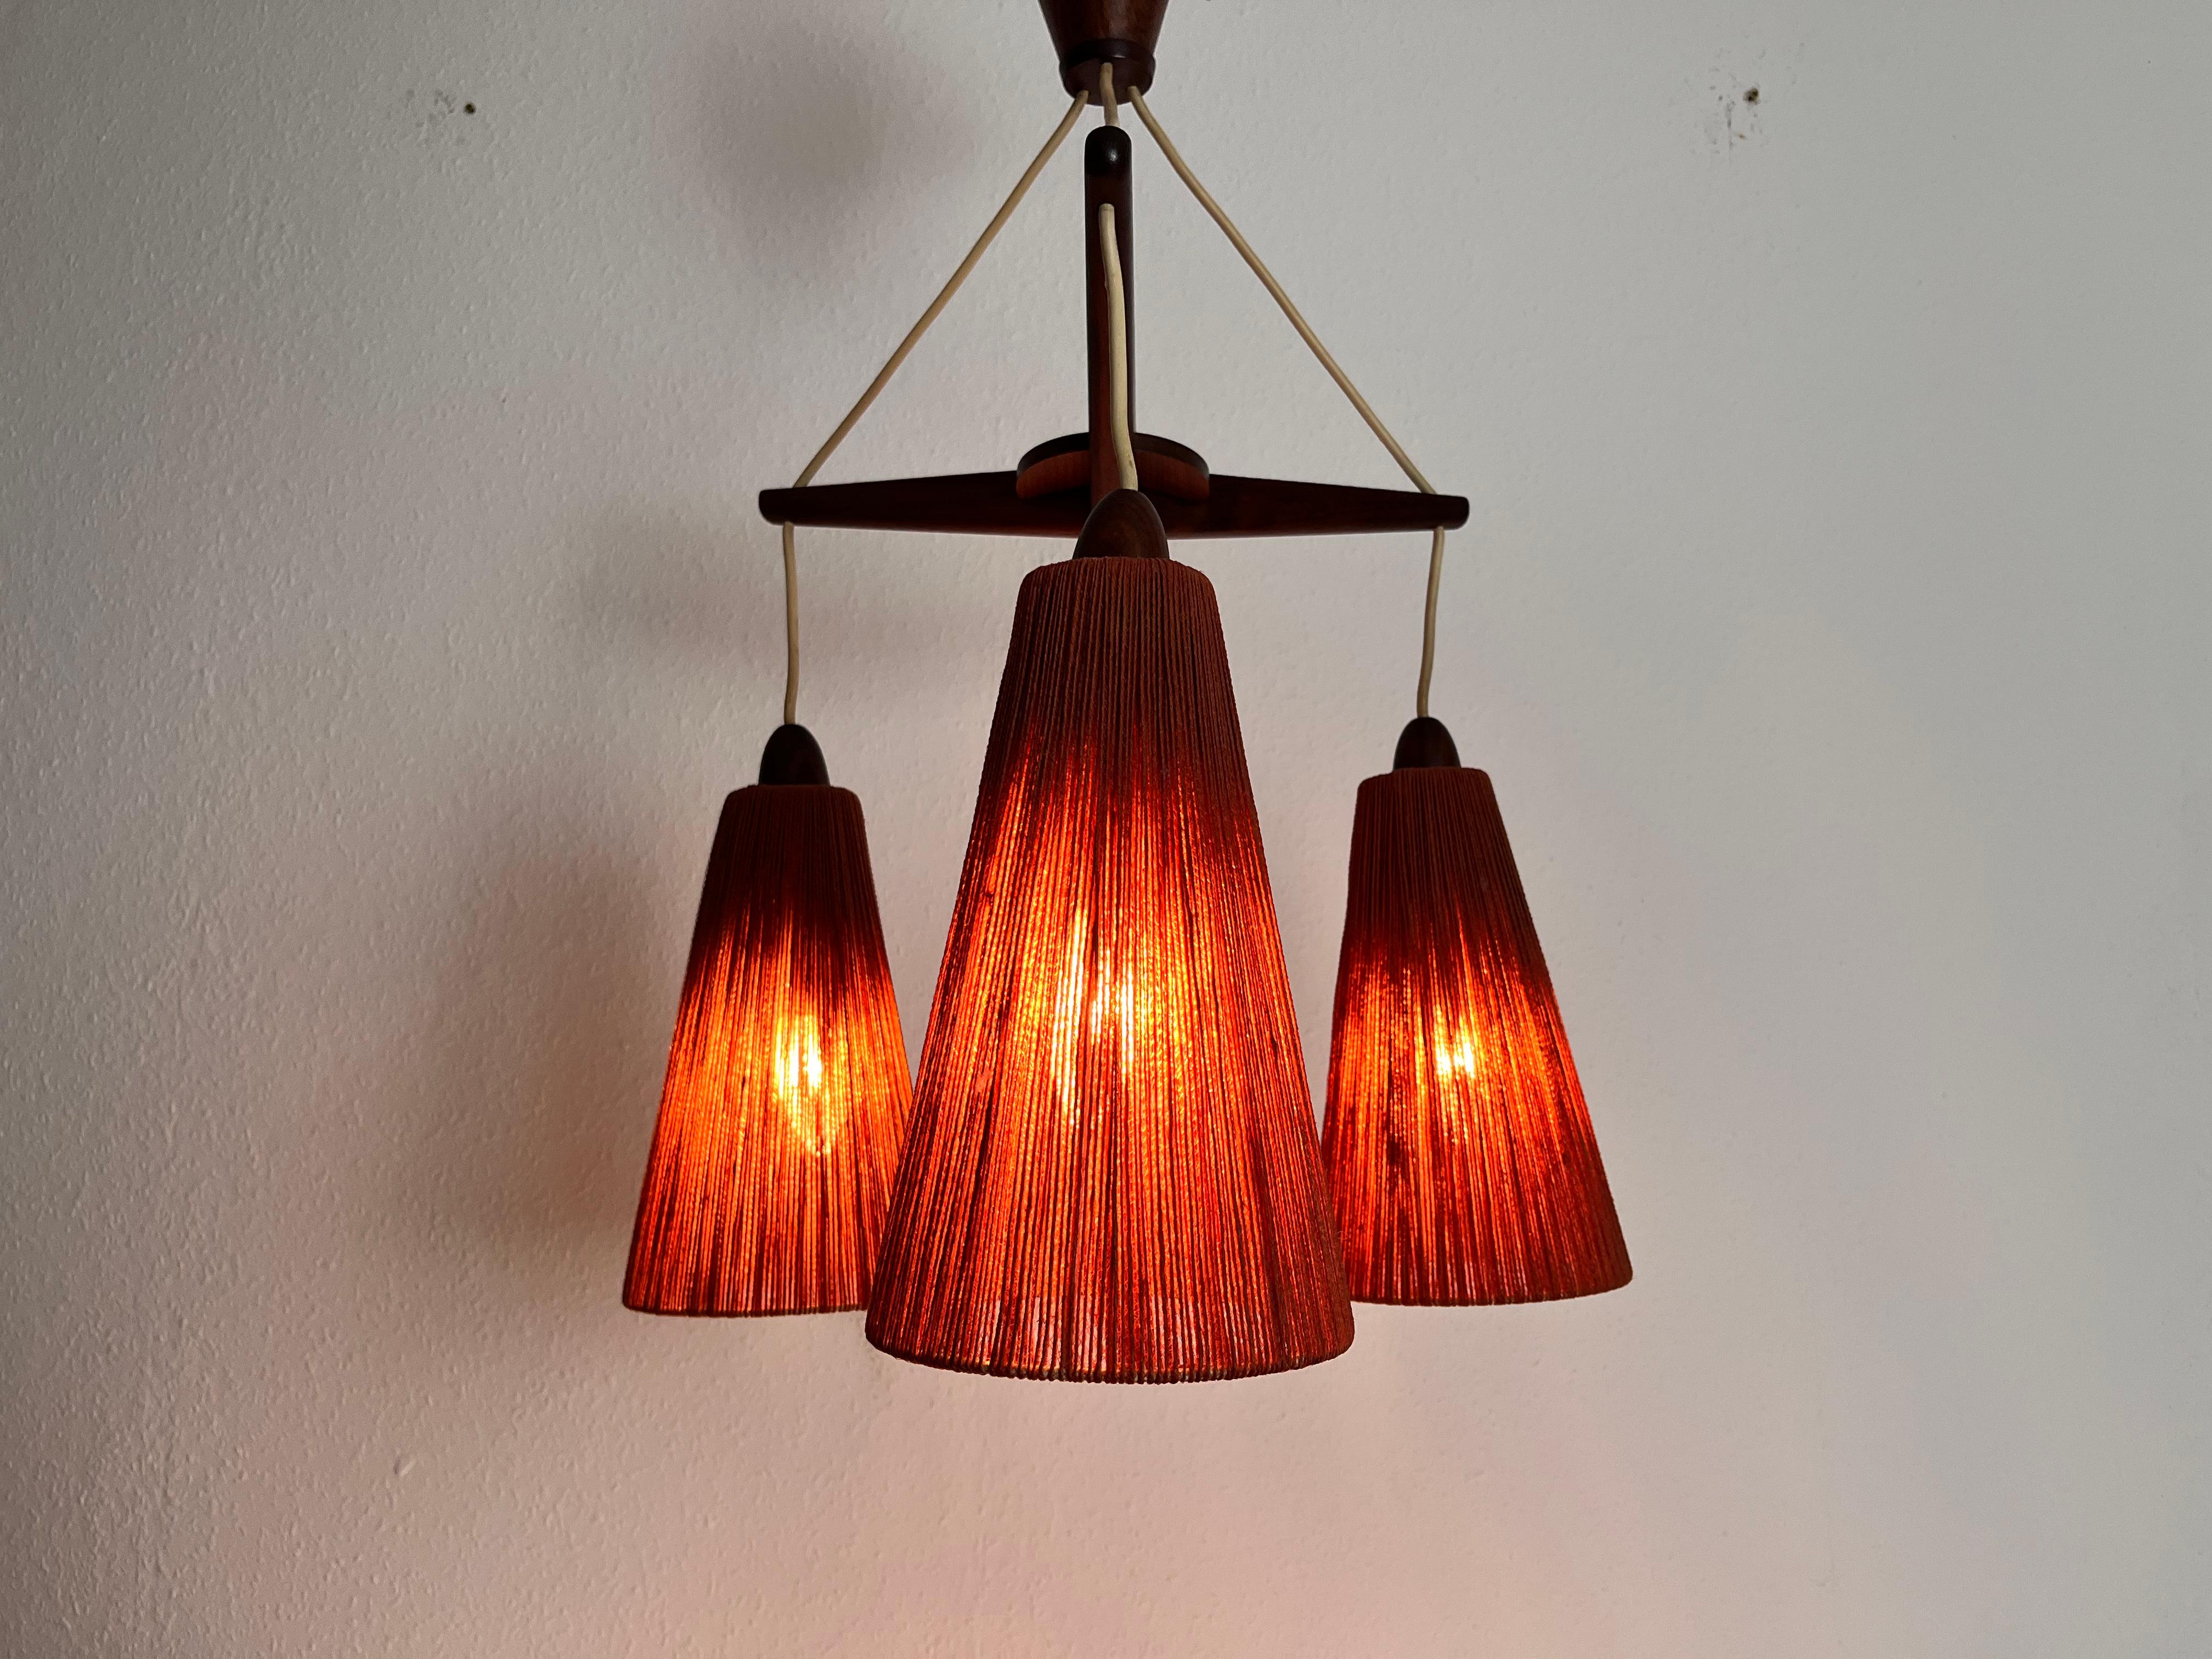 Midcentury Teak and Cord Shade Hanging Lamp by Temde, circa 1960 For Sale 1